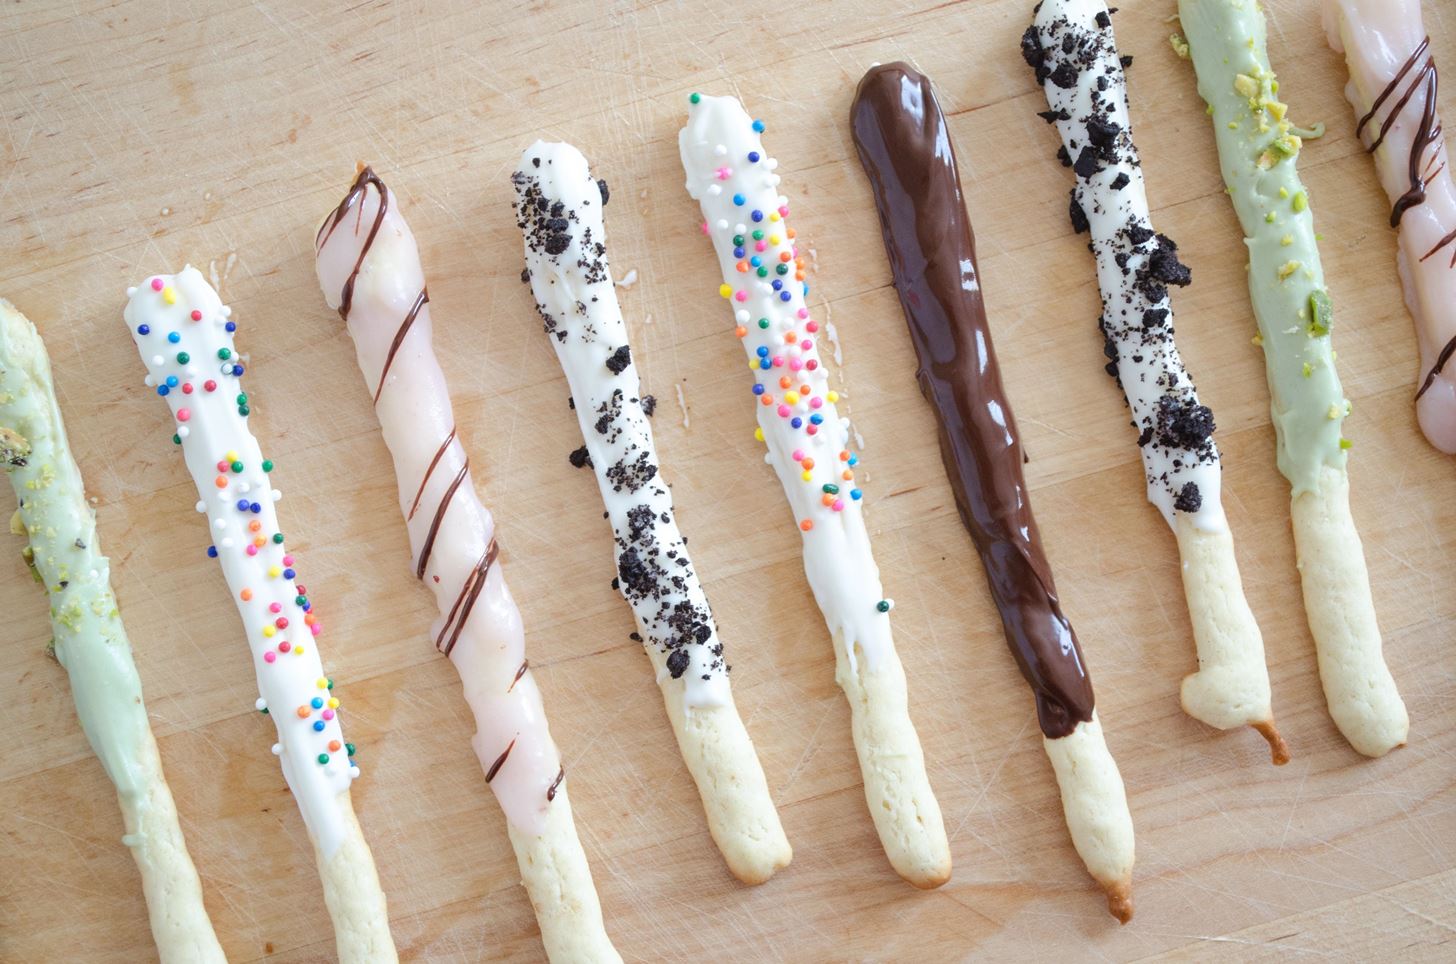 Make Copycat Pocky Sticks in Any Crazy Flavor Combination You Want